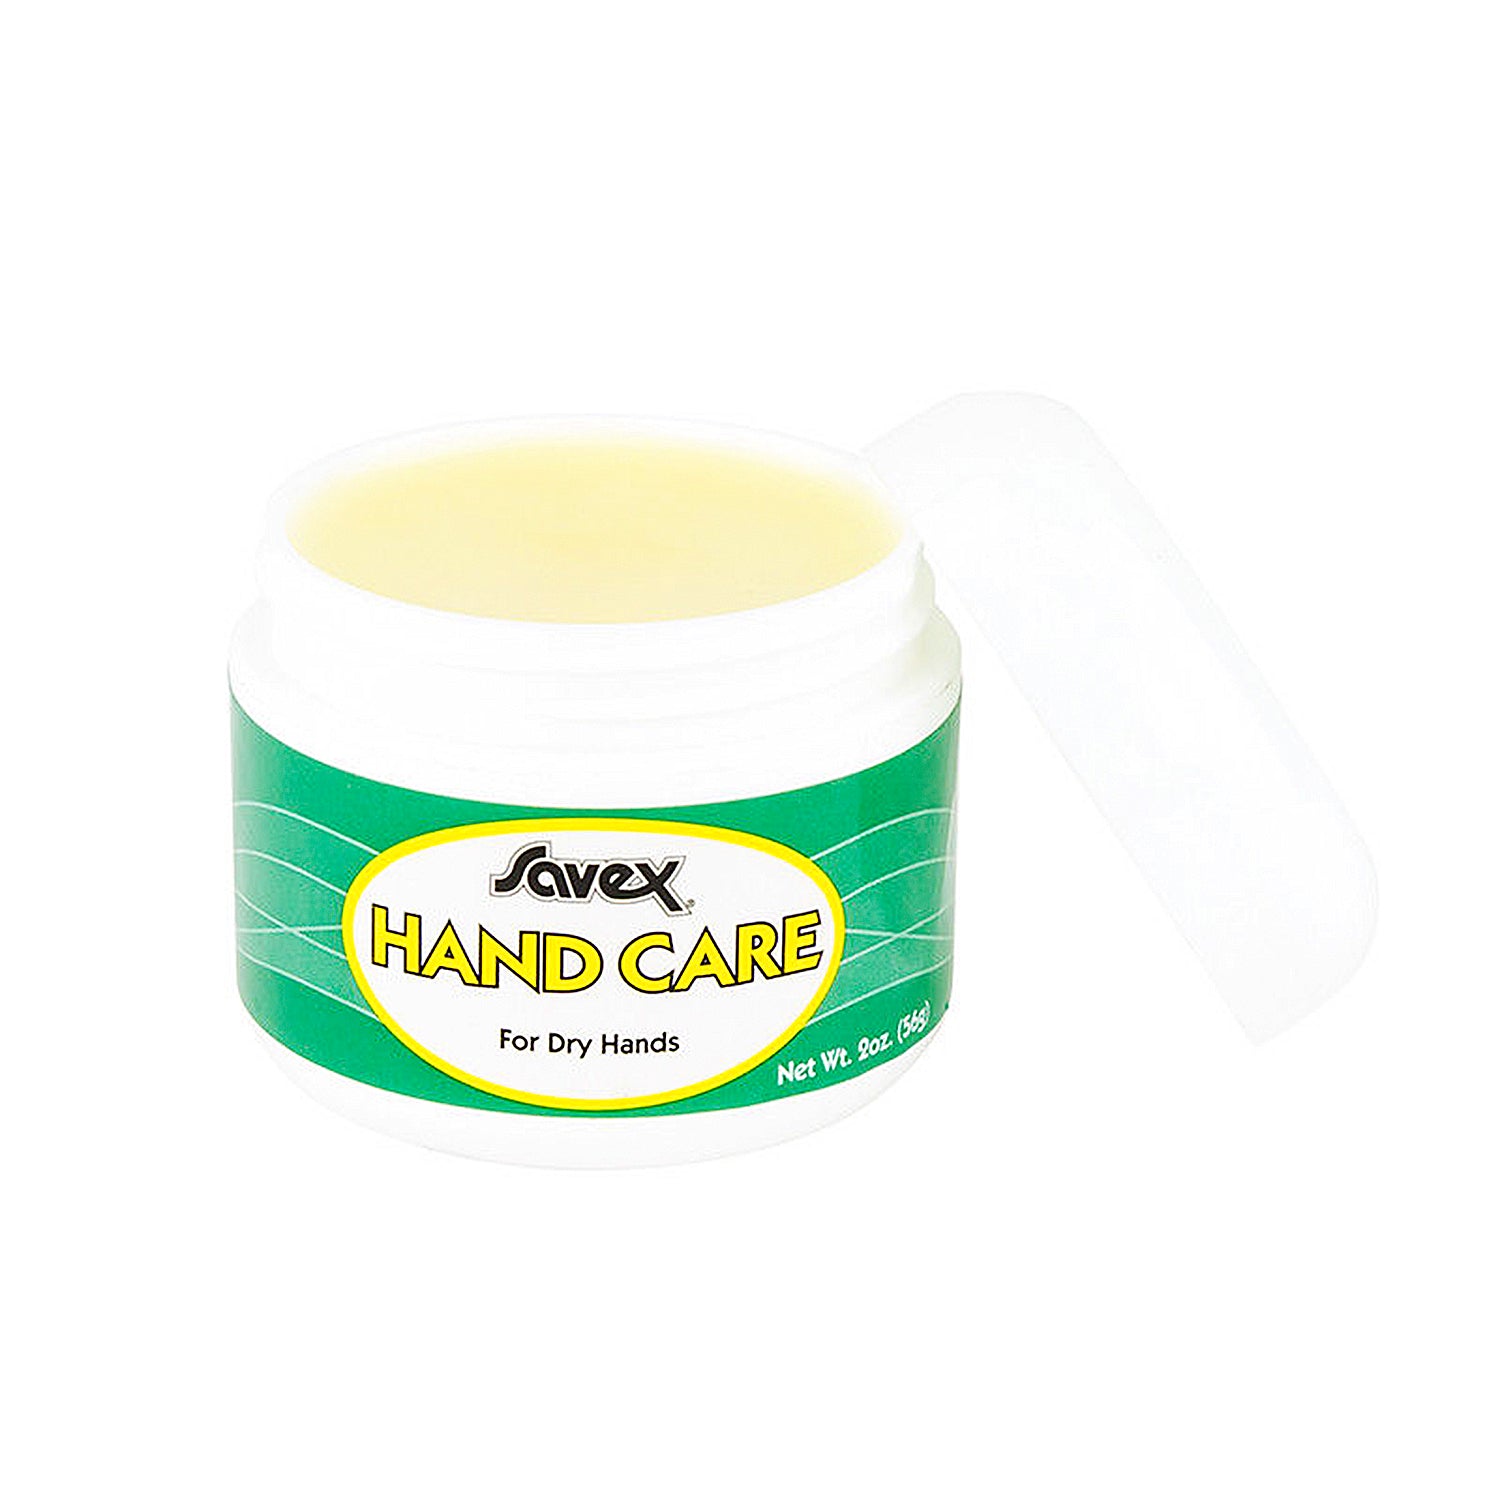 Savex Hand Cream For Dry Chapped Hands - Moisturizing Hand Therapy Lotion